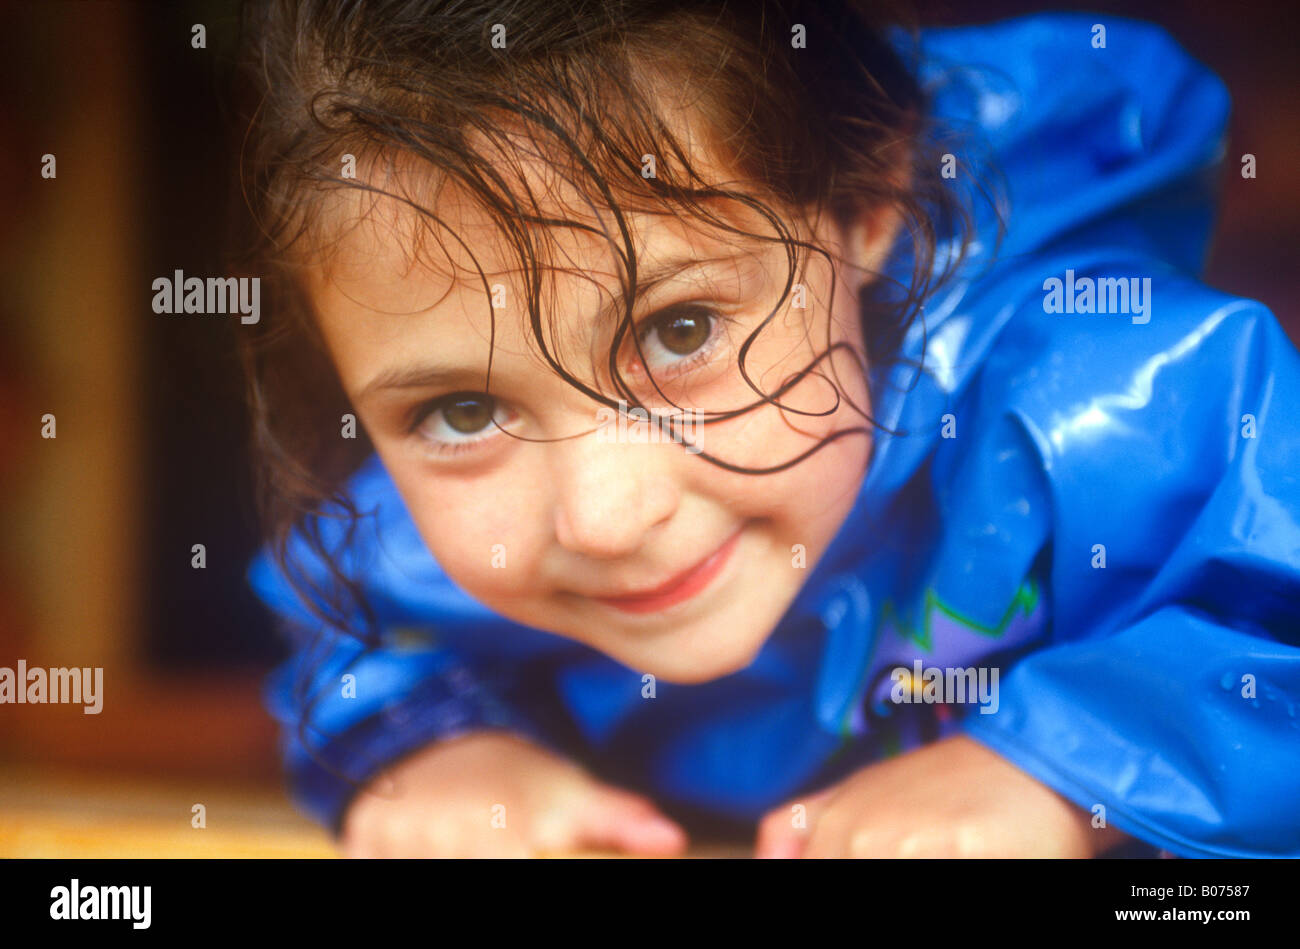 A shy child with curls, big eyes and wearing a bright blue raincoat Stock Photo